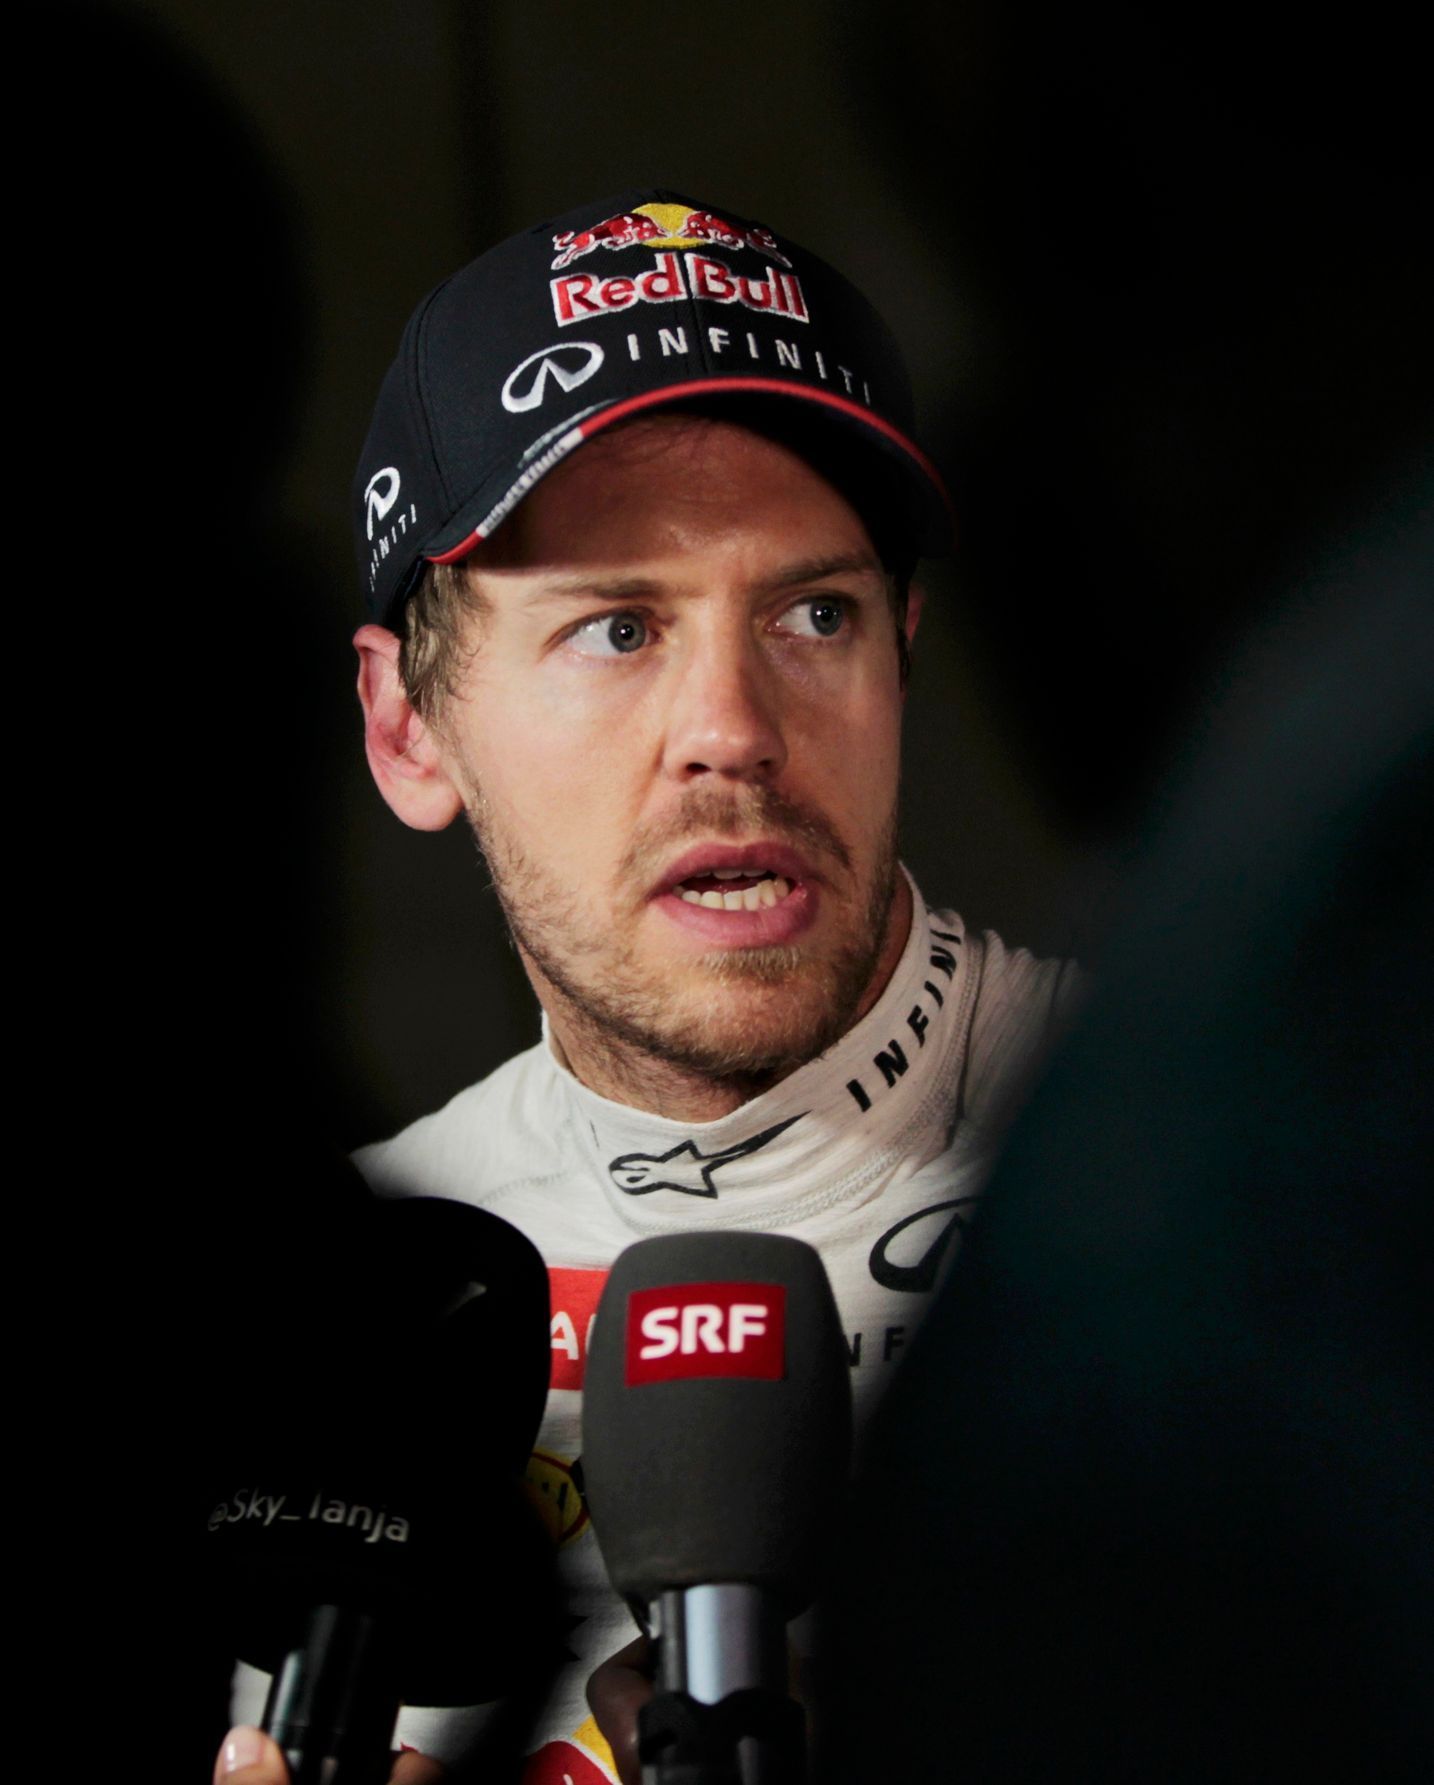 Red Bull Formula One driver Sebastian Vettel of Germany speaks during a news conference after the qualifying session of the Bahrain F1 Grand Prix at the Bahrain International Circuit (BIC) in Sakhir